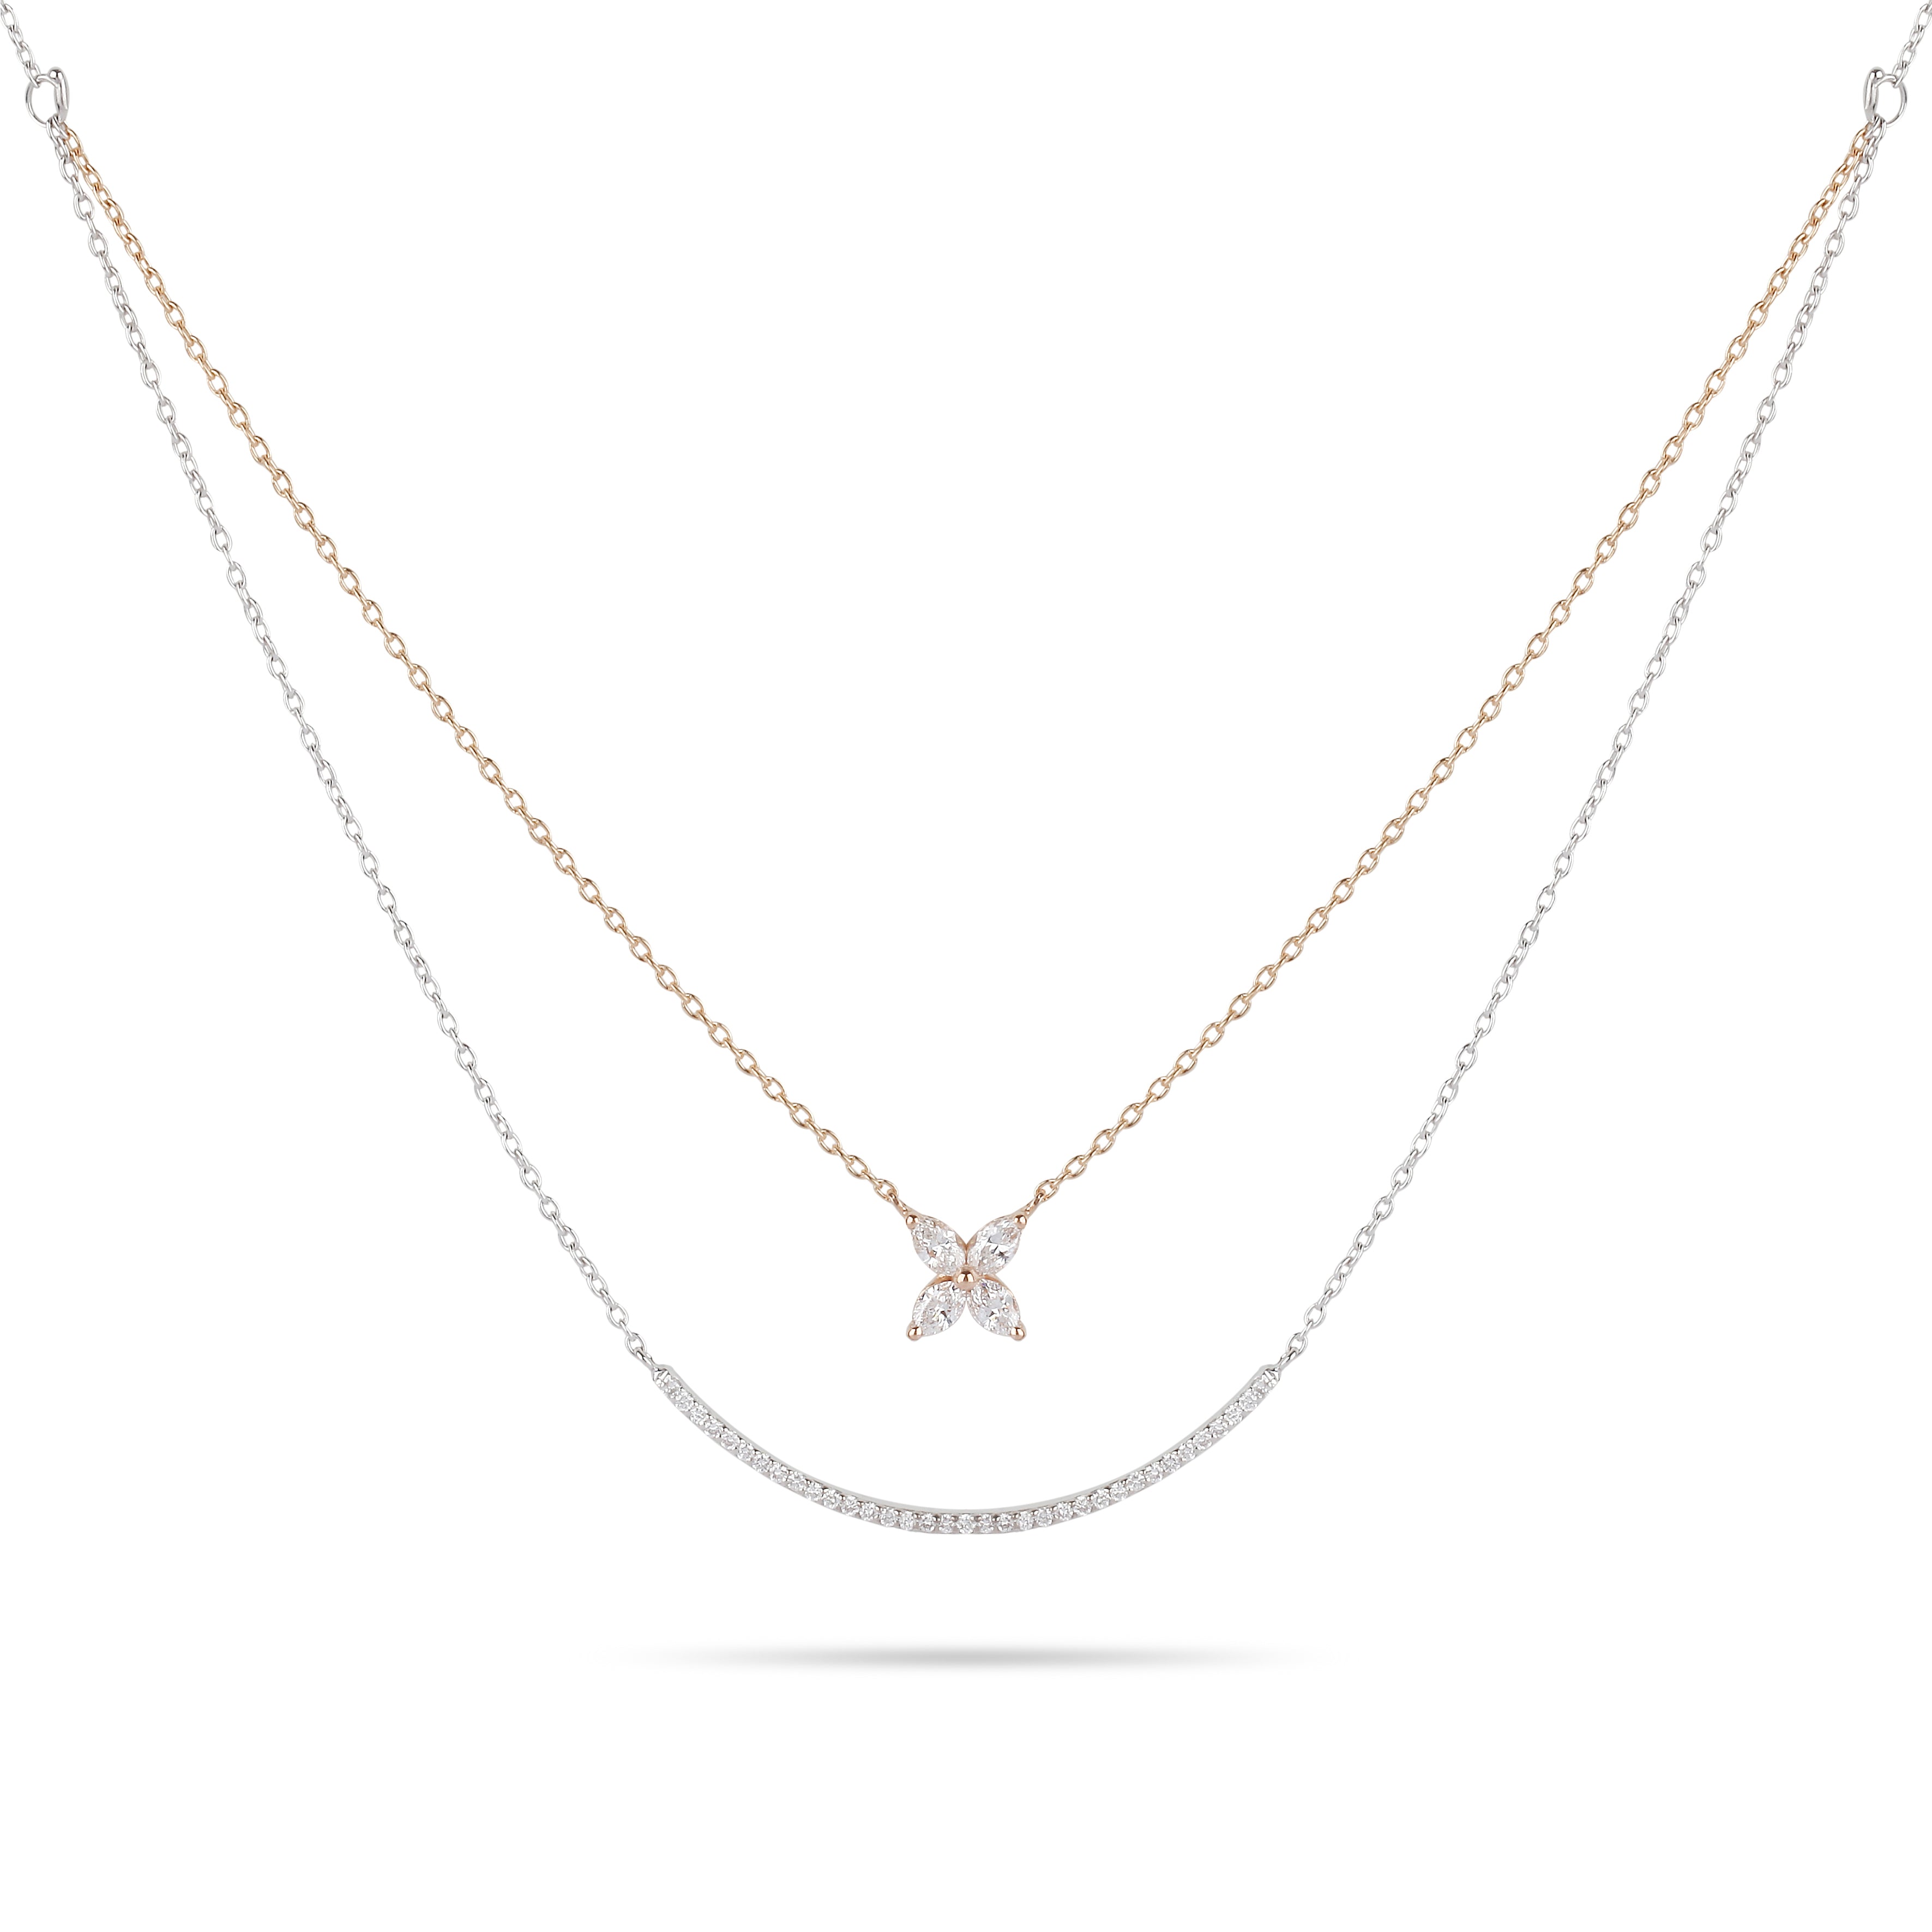 Two-Tone Double Chain Floral Diamond Necklace | Diamond Necklace | Chain Necklace Women